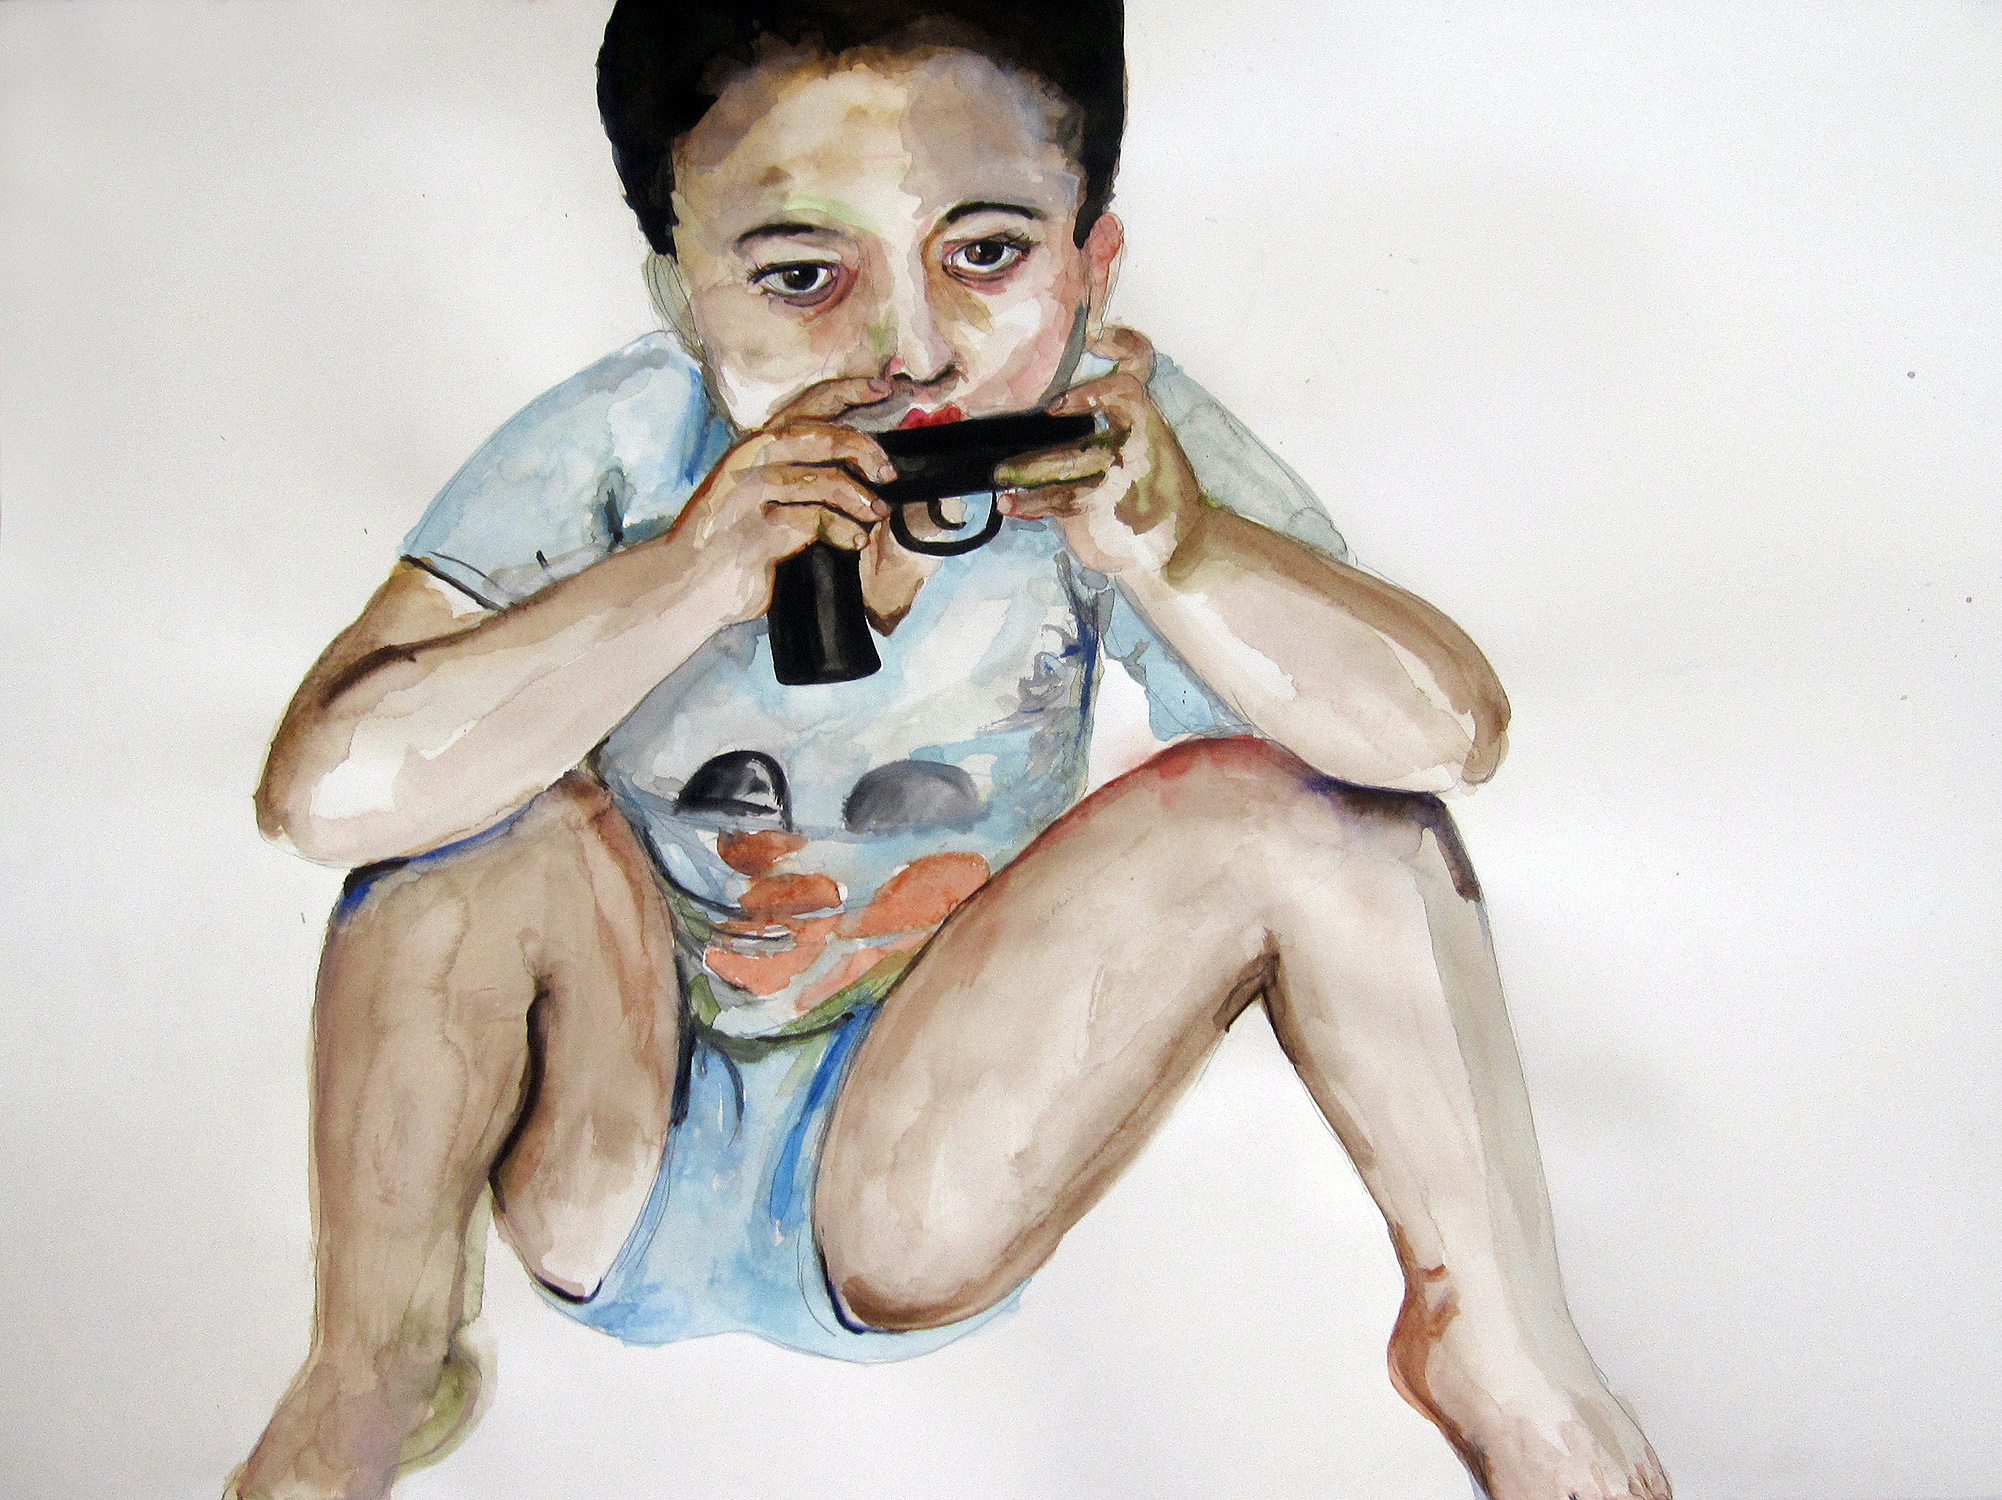 Boy Squatting, 2010, Graphite and watercolor on paper. 22 x 30 in.